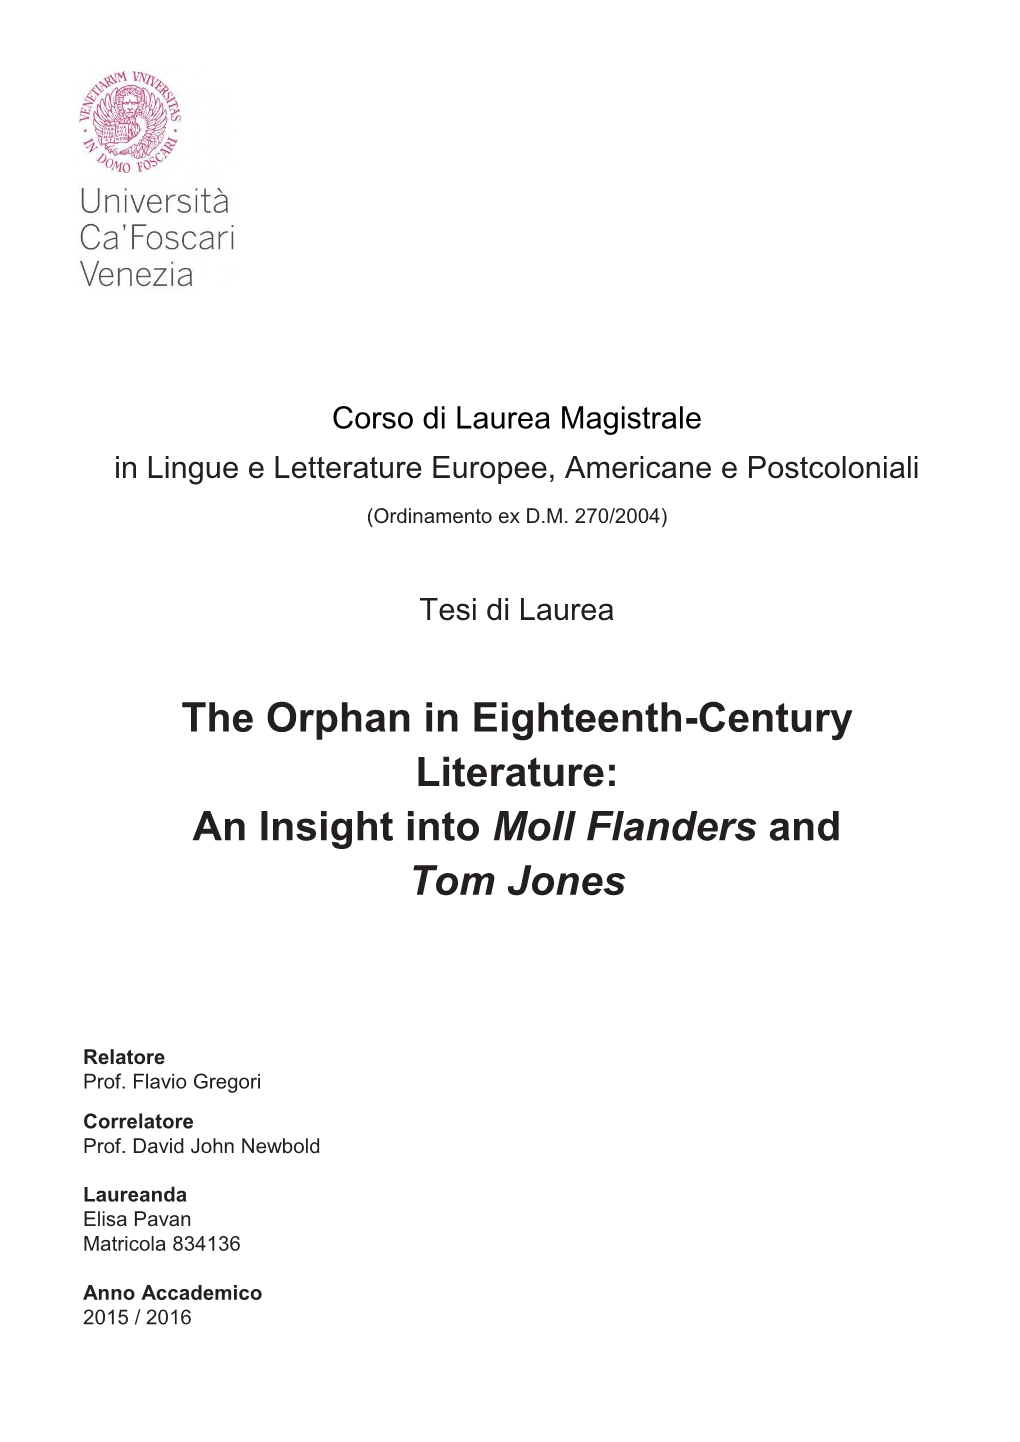 The Orphan in Eighteenth-Century Literature: an Insight Into Moll Flanders and Tom Jones